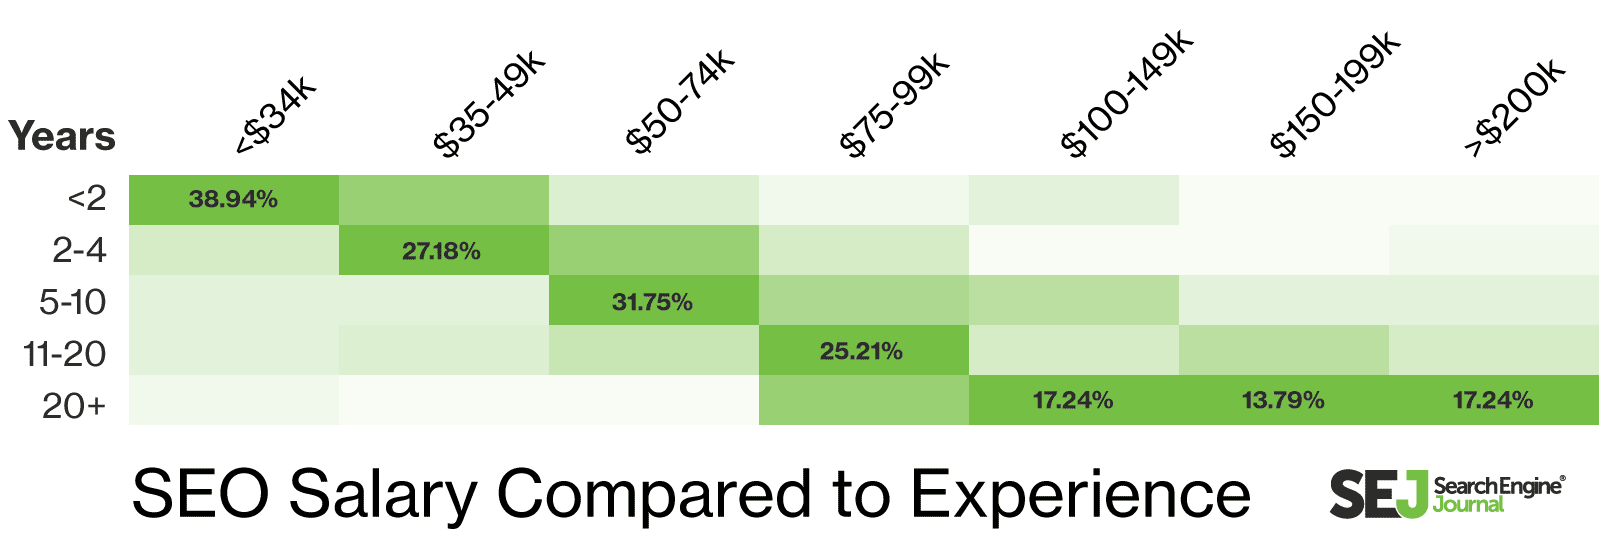 Salaries for SEO managers vary significantly according to experience, too.